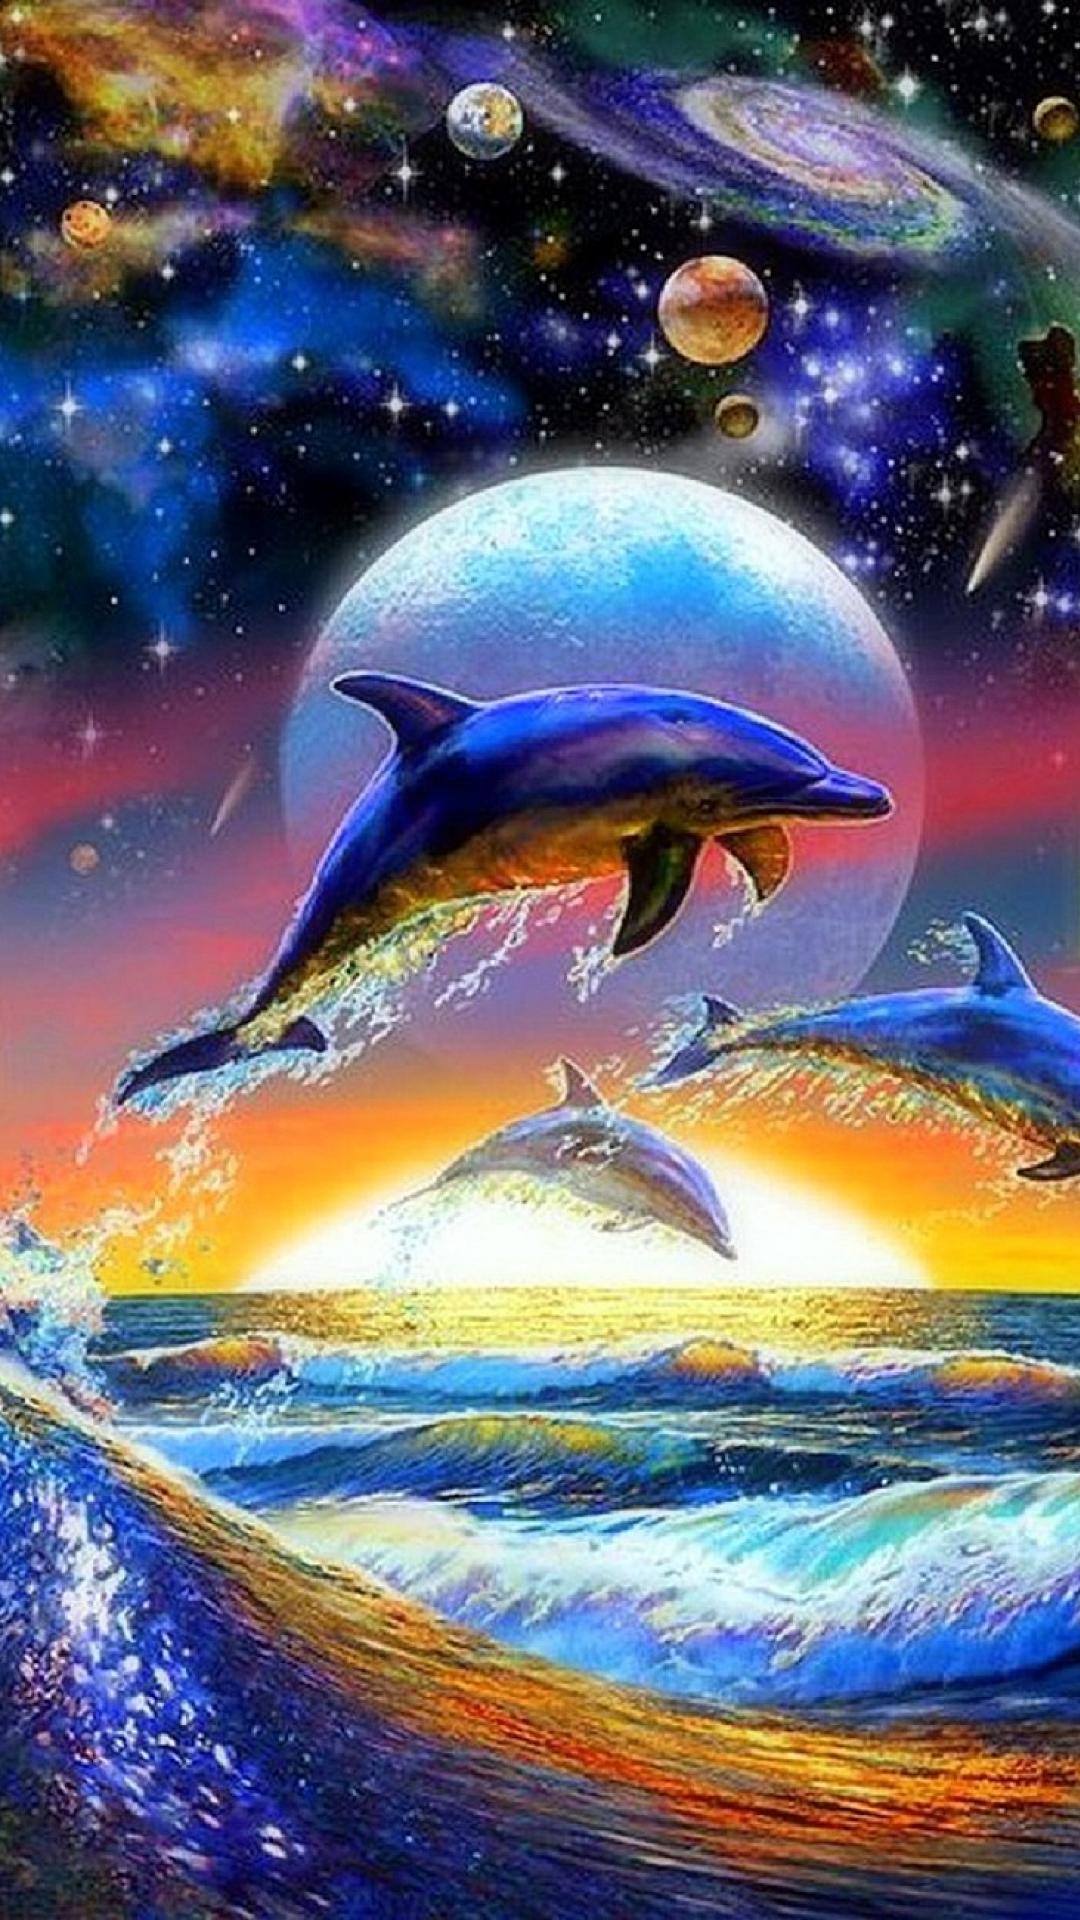 Dolphin Illustrations Wallpaper Iphone Wallpapers